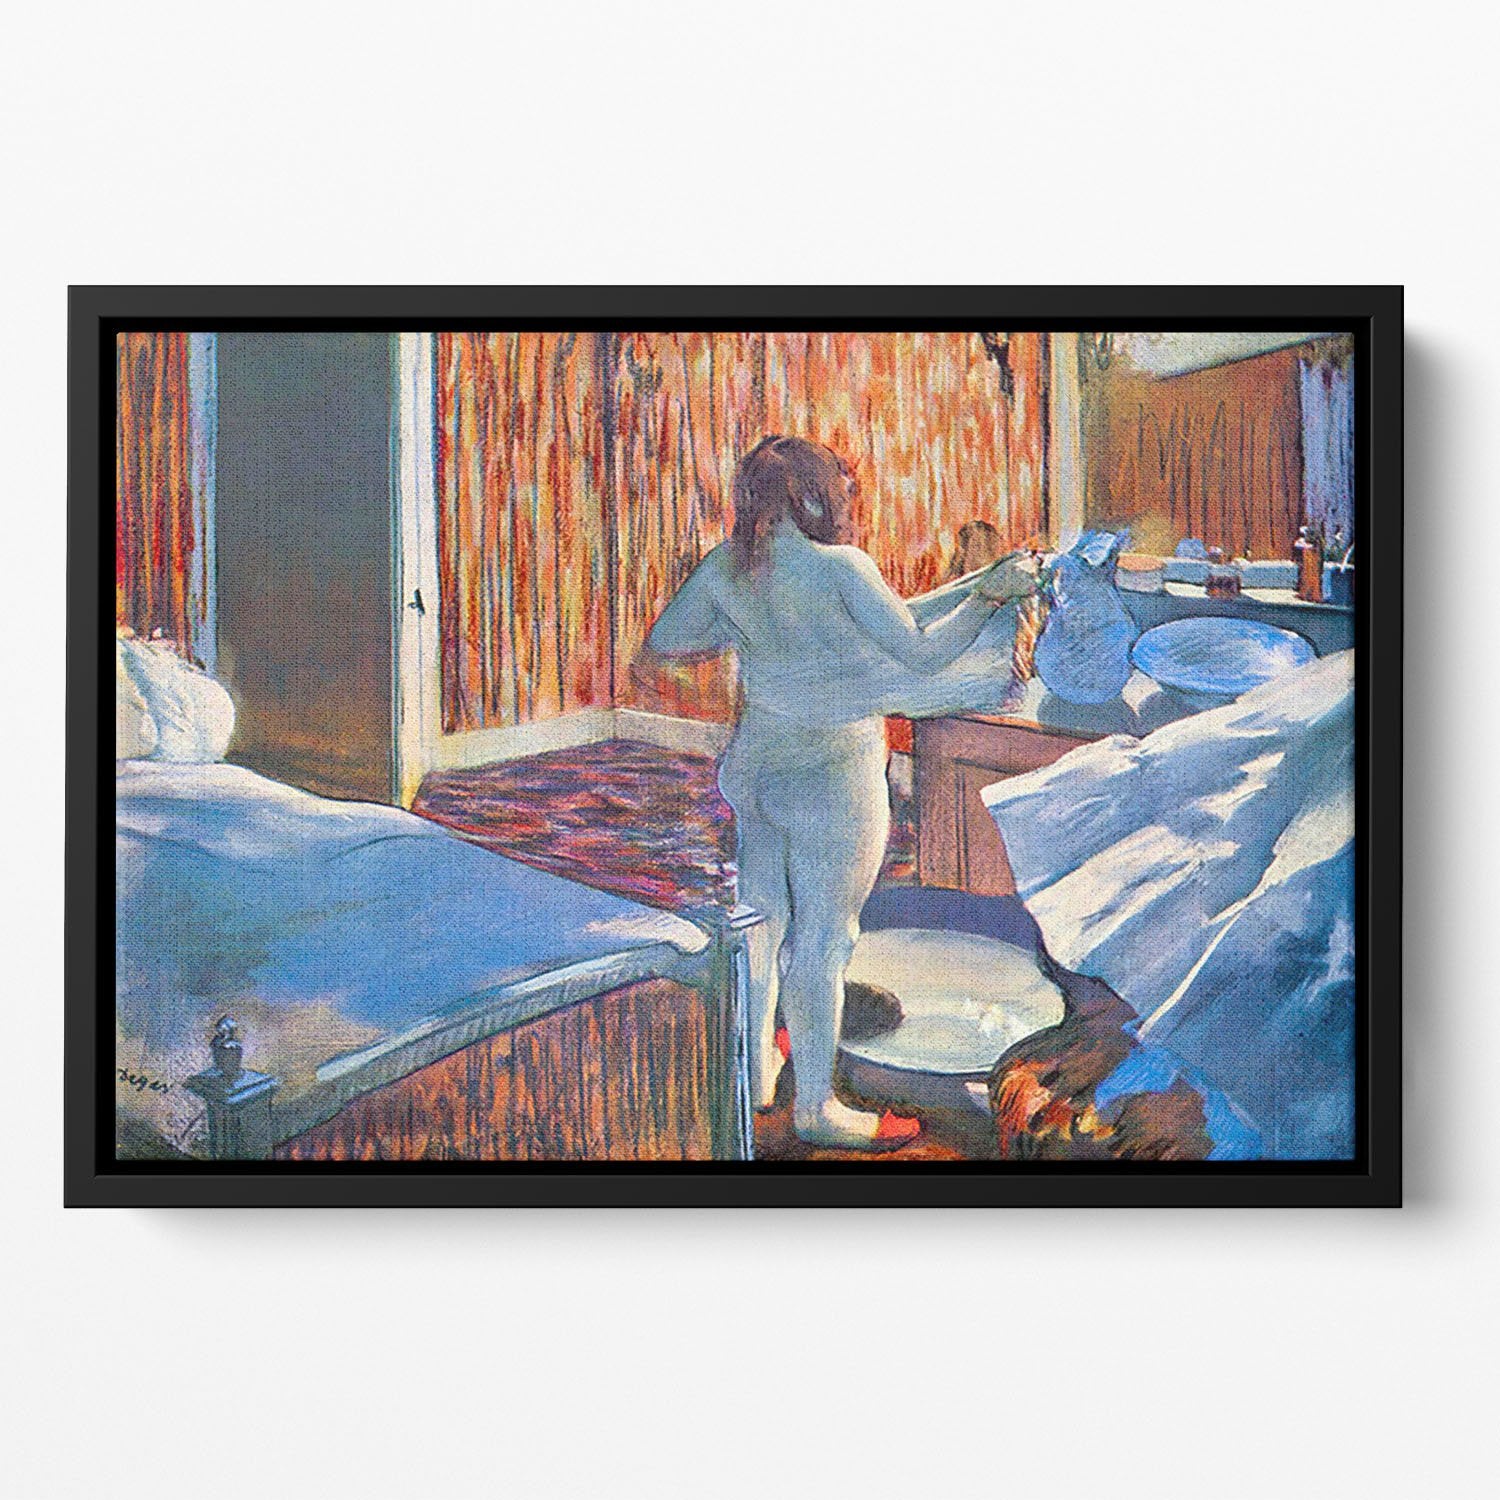 Women at the toilet 3 by Degas Floating Framed Canvas